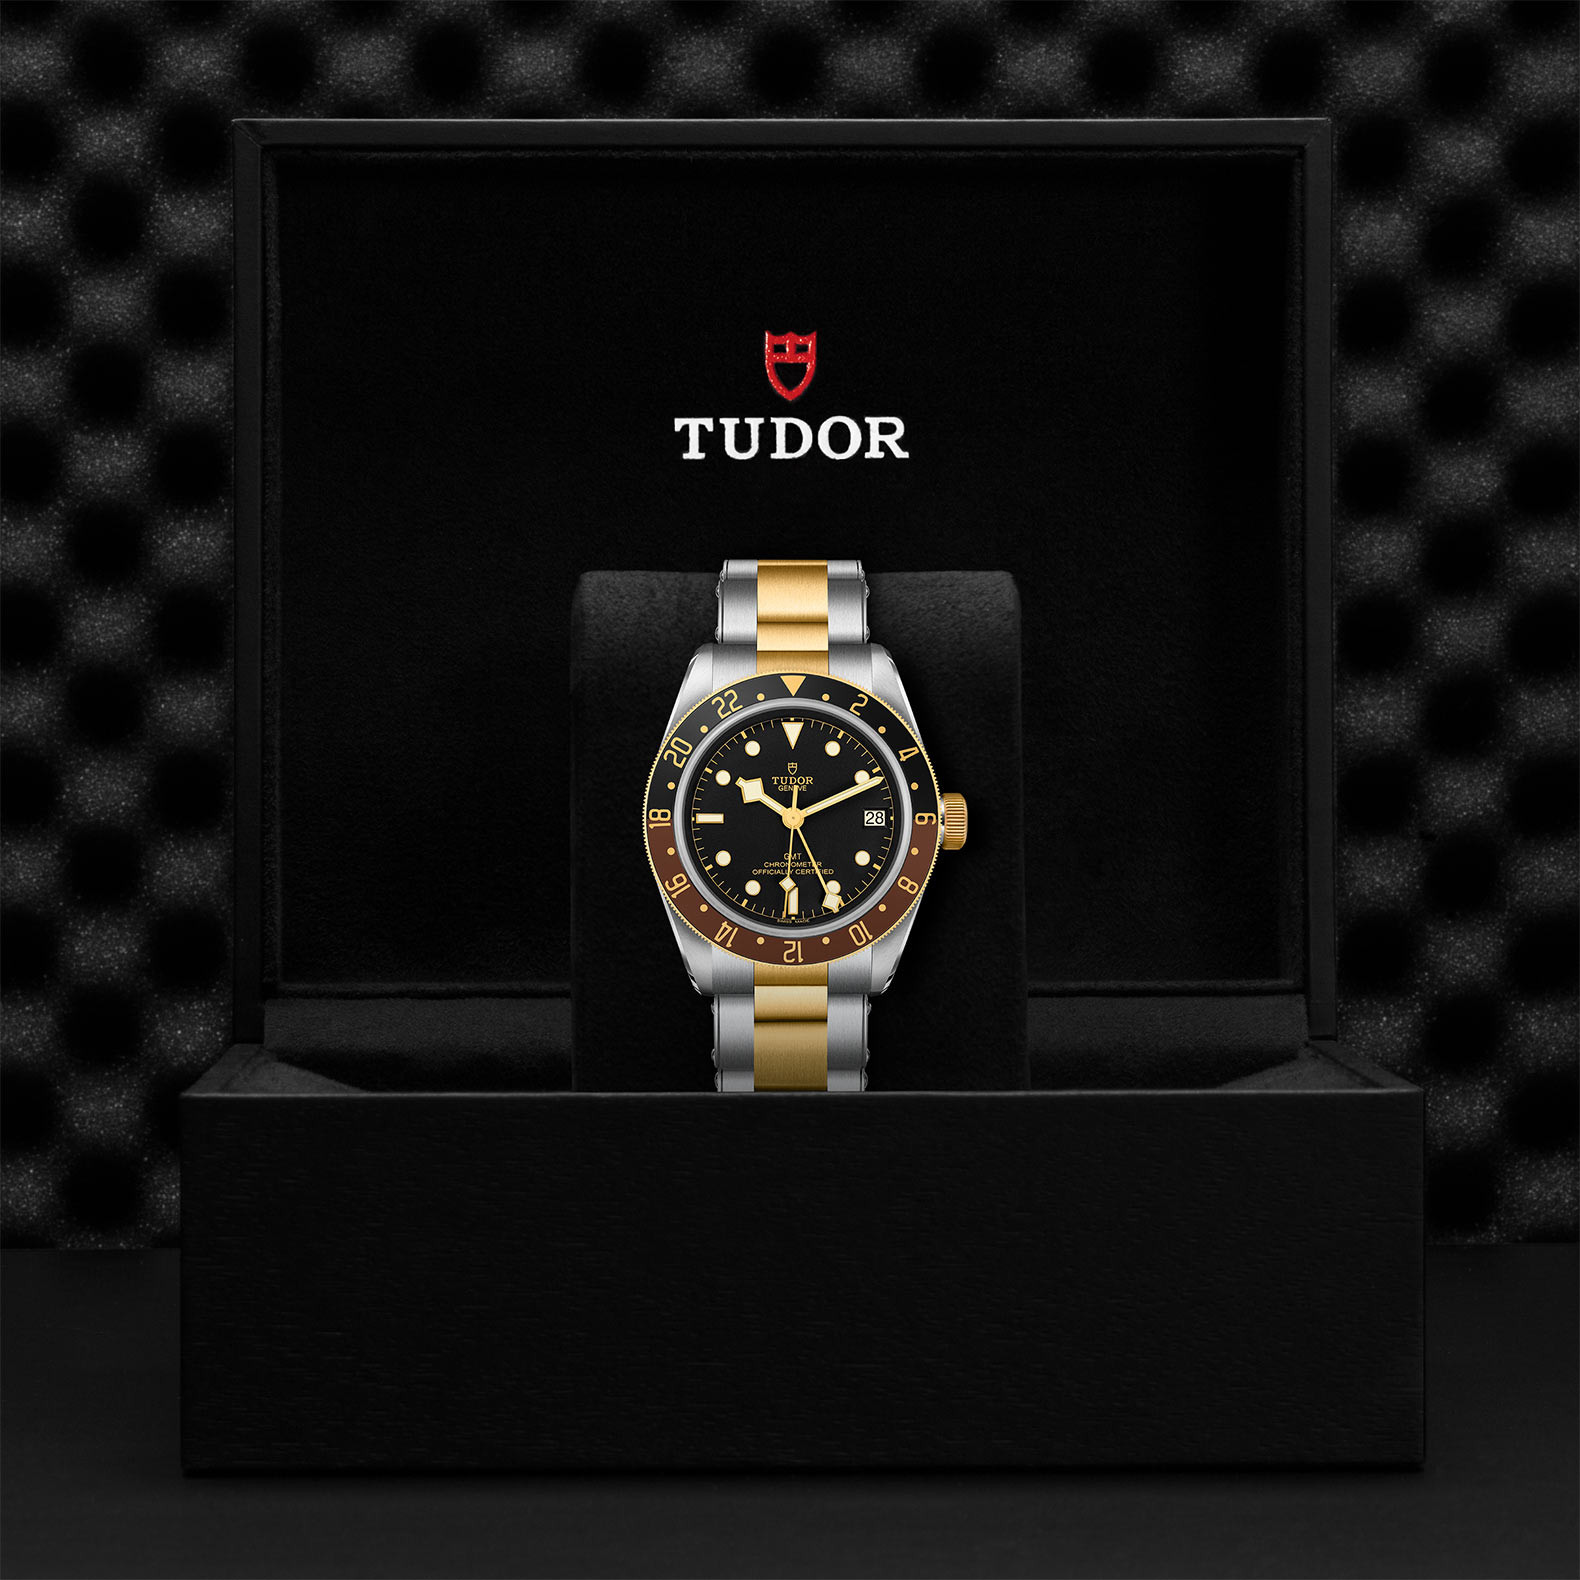 TUDOR Black Bay GMT S&G with Steel Case and Steel And Yellow Gold Bracelet - 41mm M79833MN-0001 Watch in Presentation Box